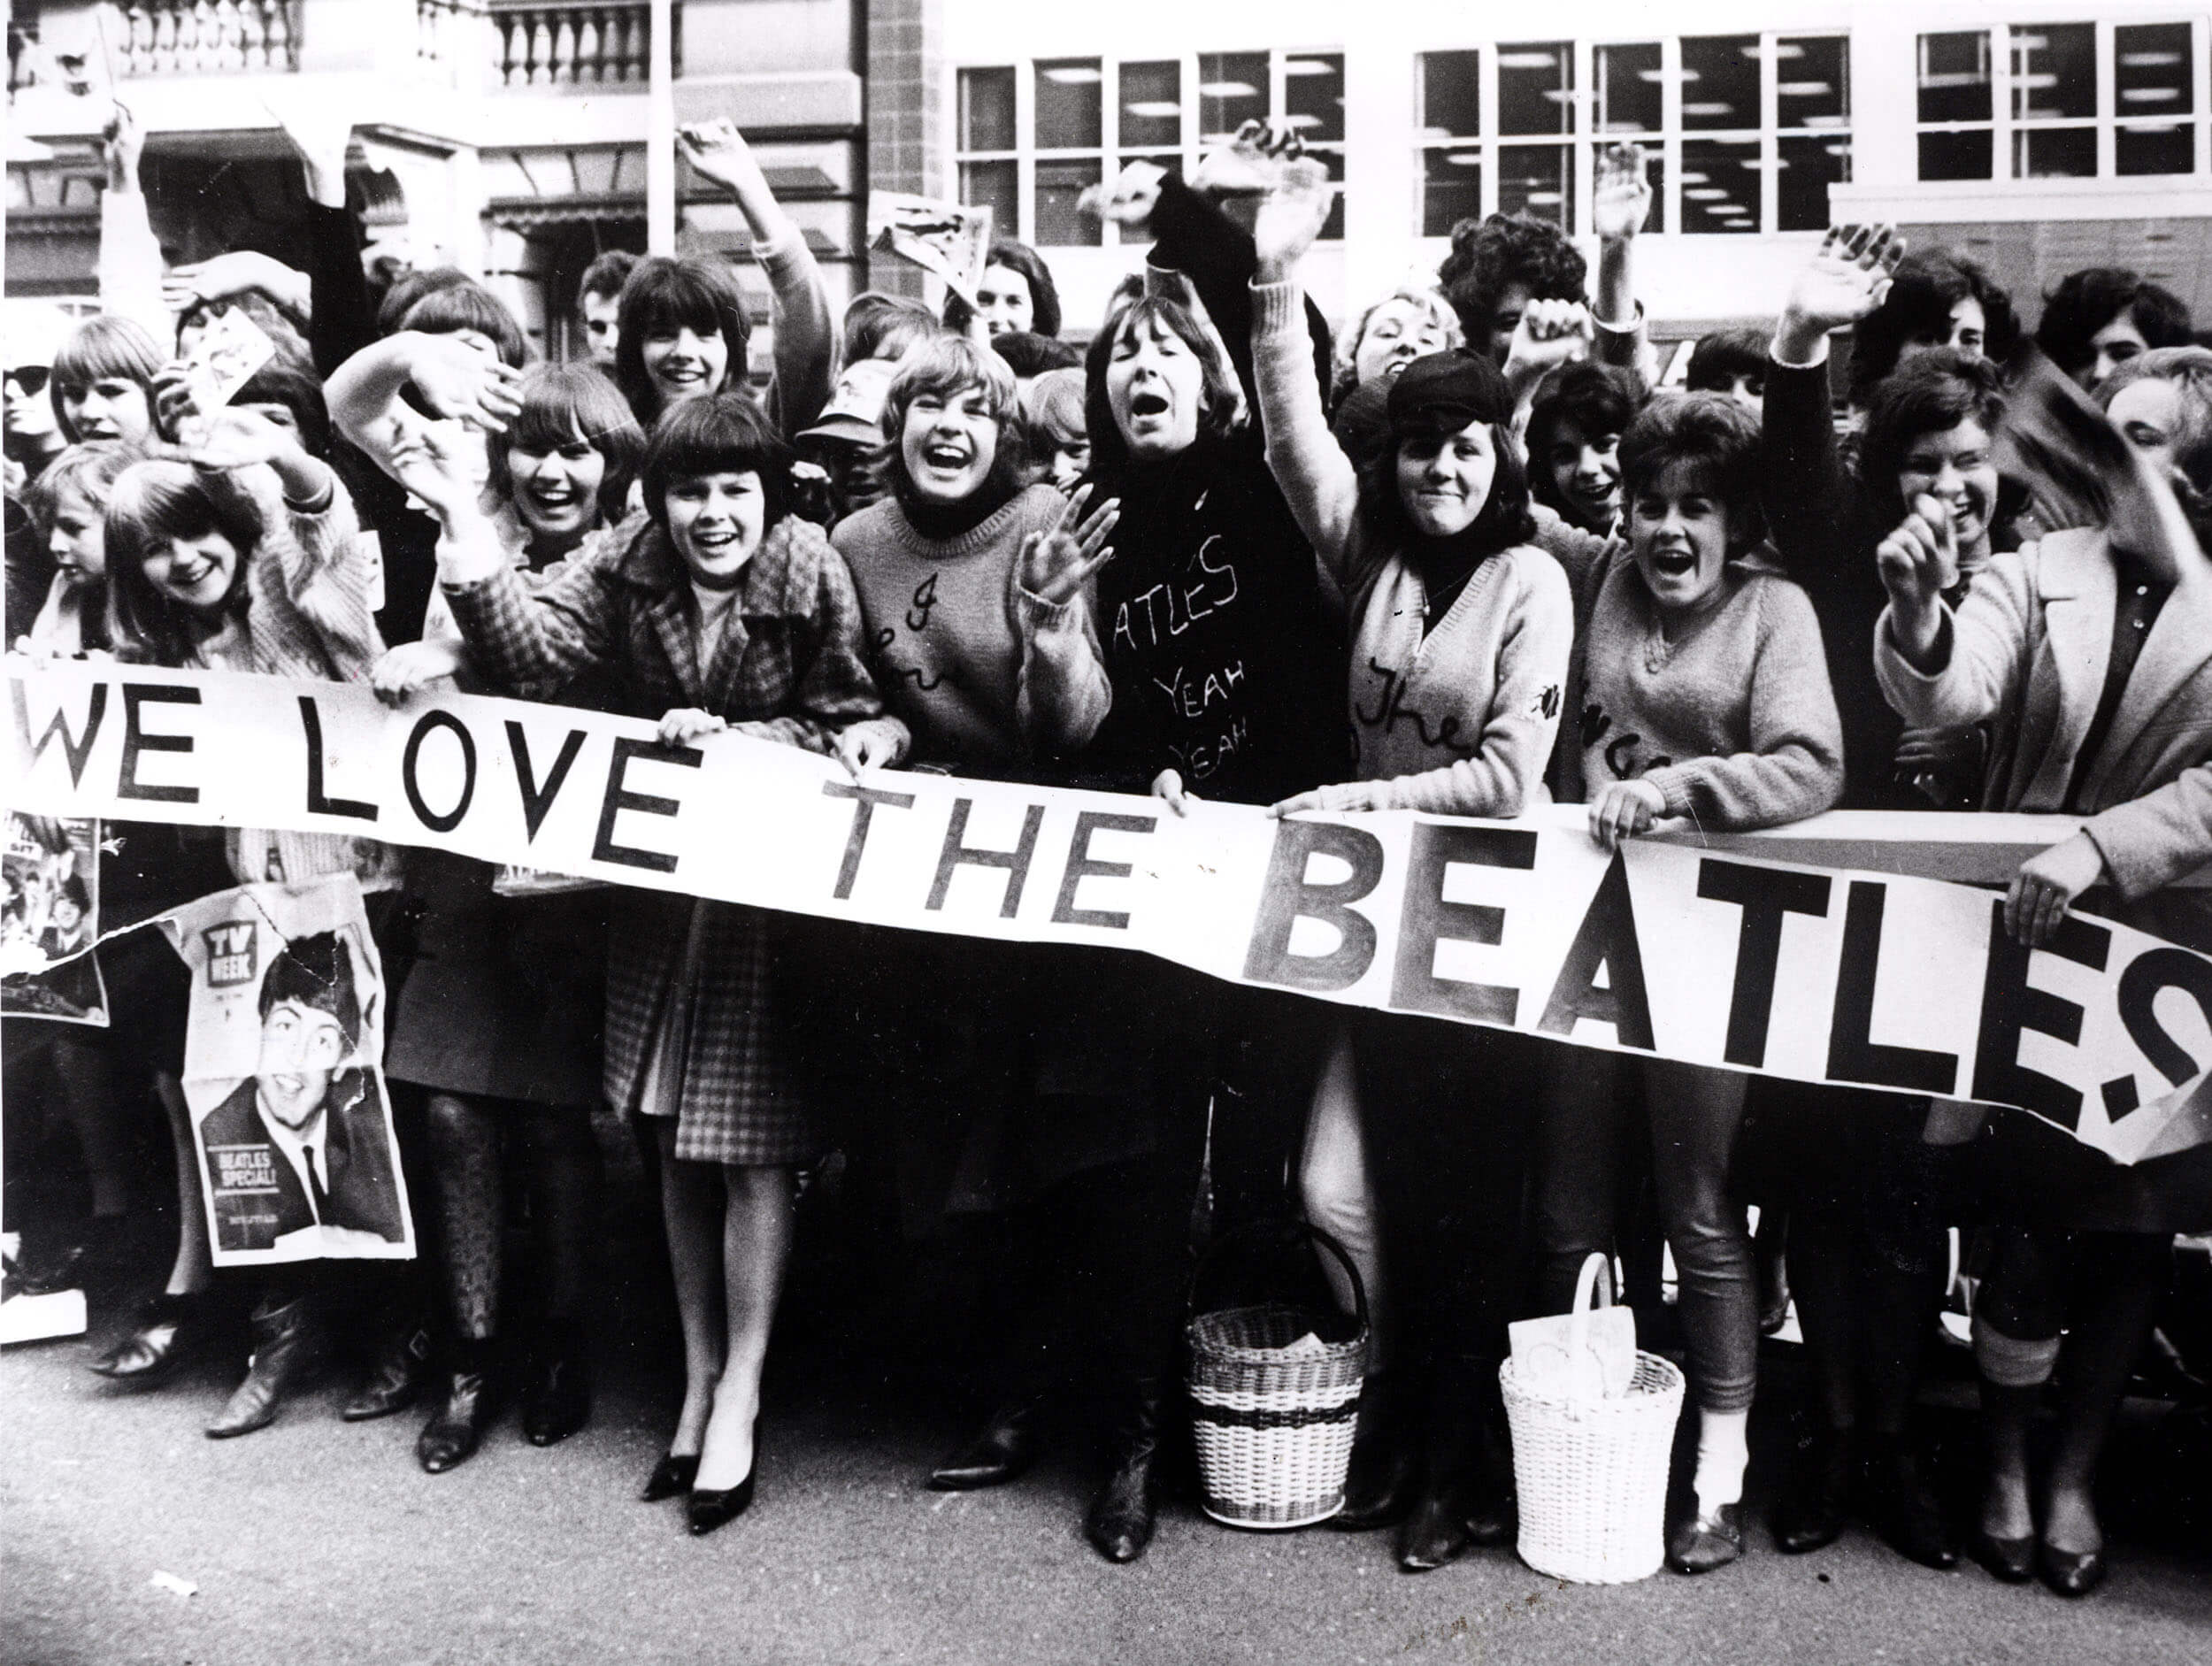 Beatles fans with a banner